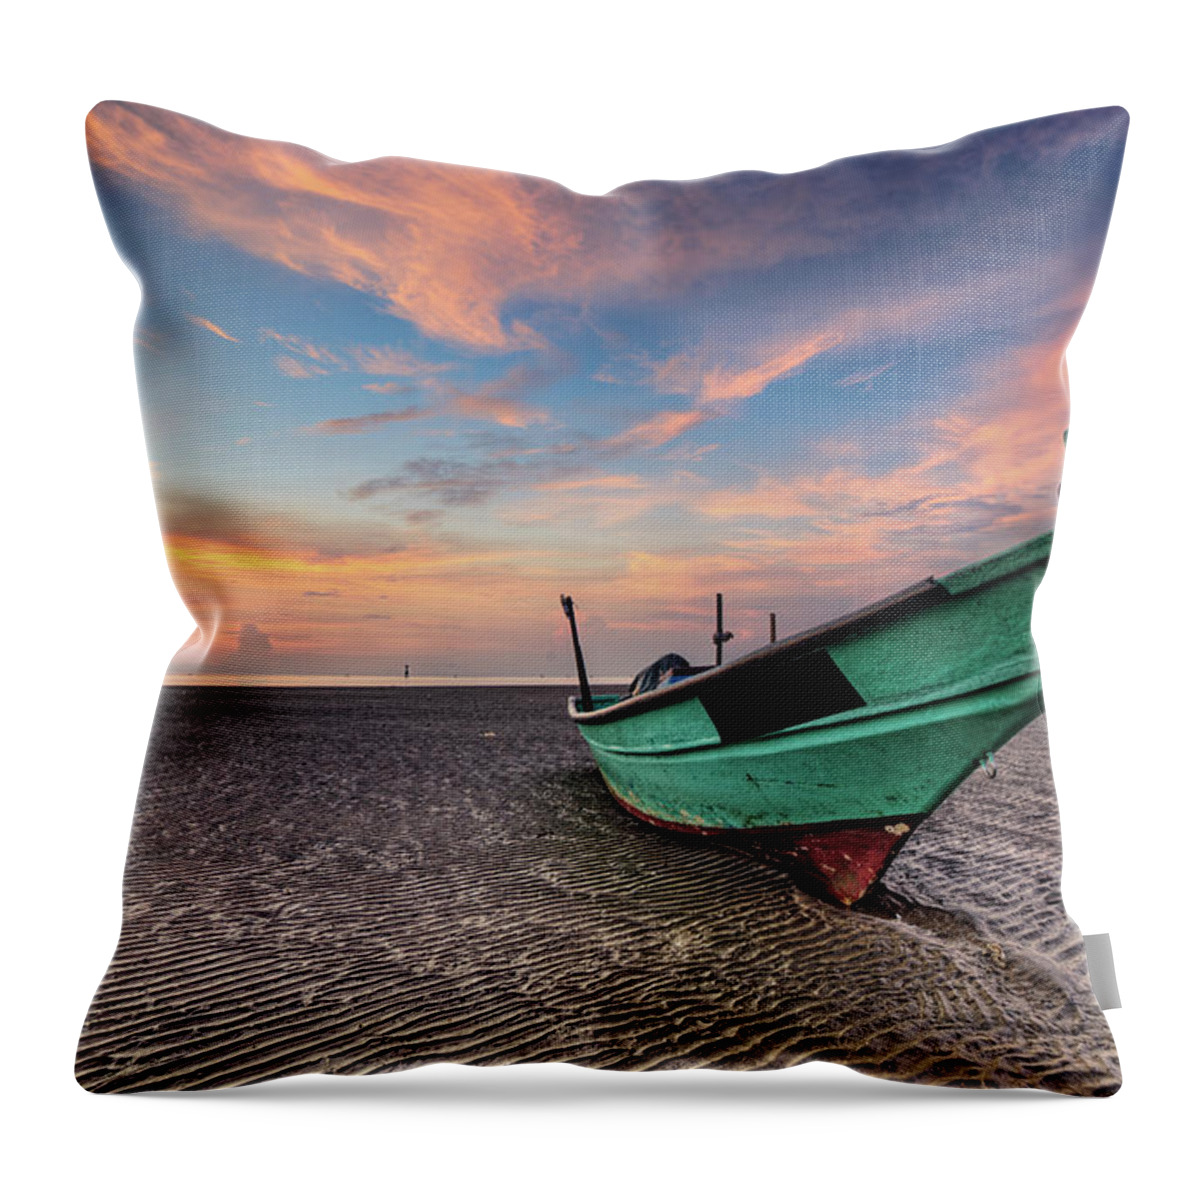 Scenics Throw Pillow featuring the photograph Snout by Ssphotography